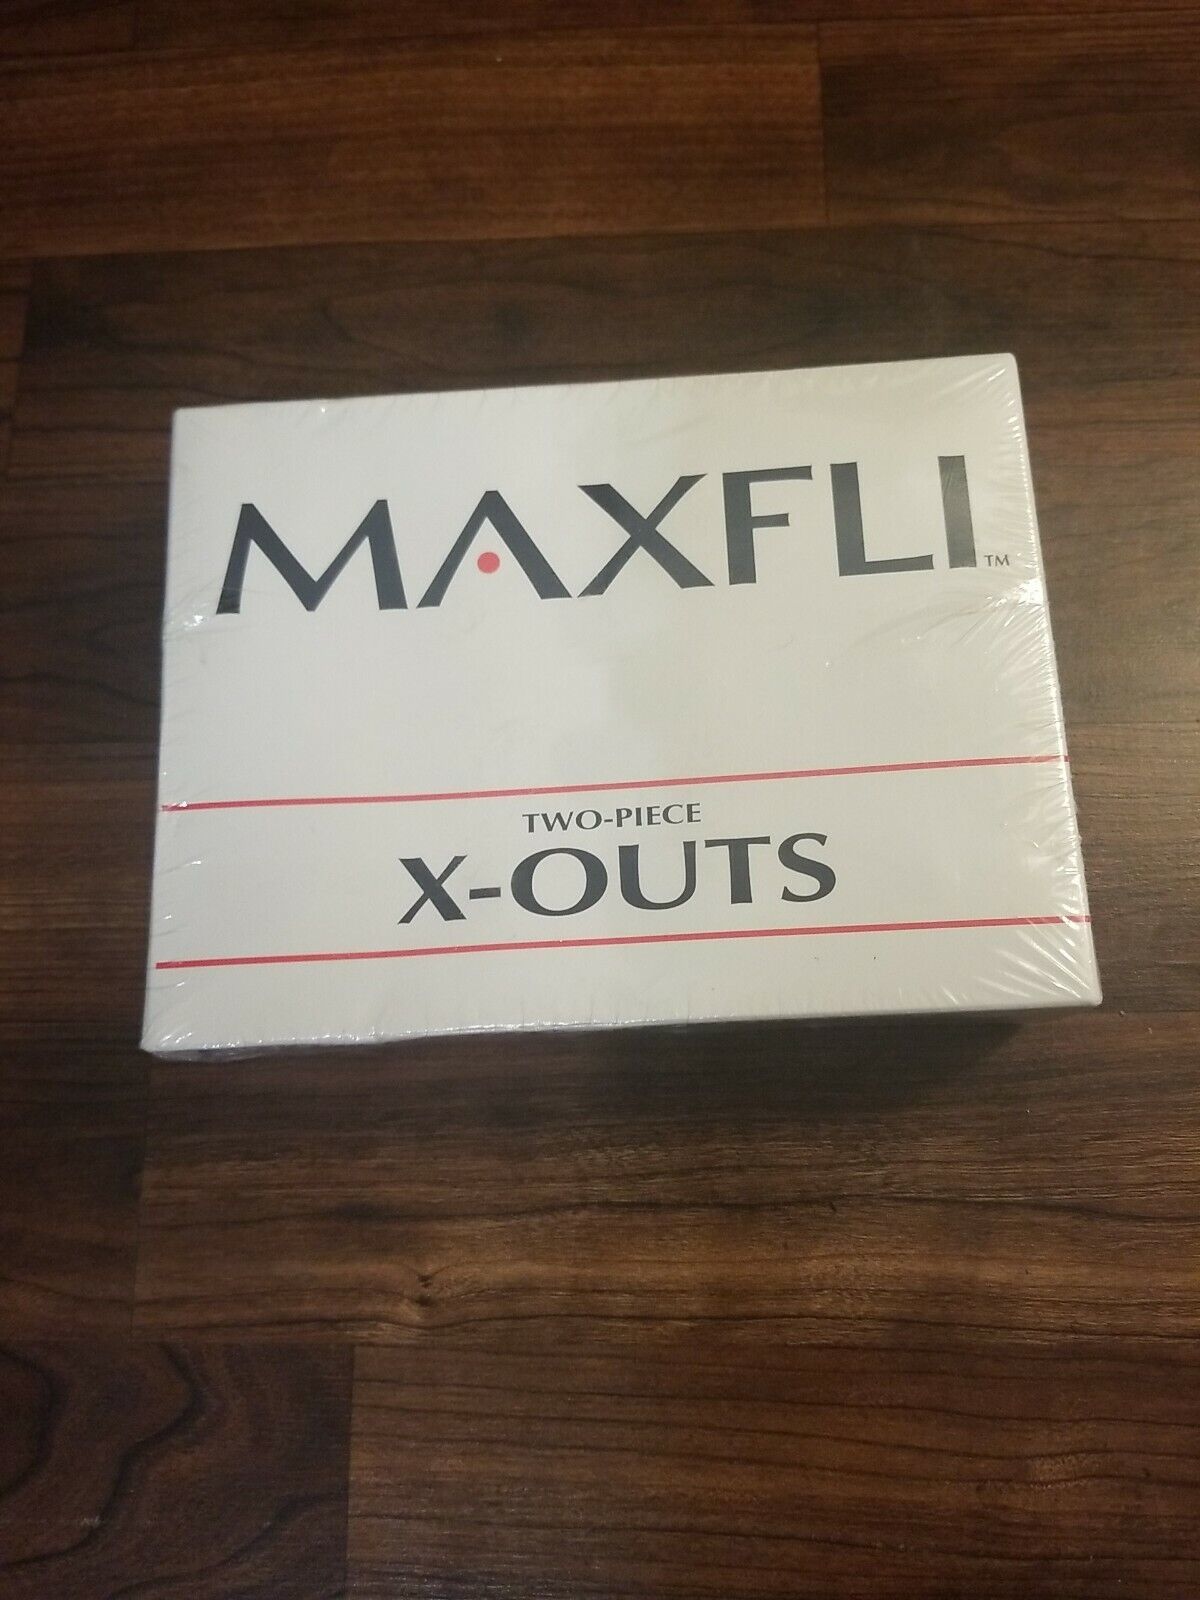 One Dozen MAXFLI  Two Piece X-Outs Golf Balls - New in Sealed Box. New Old Stock - $14.31